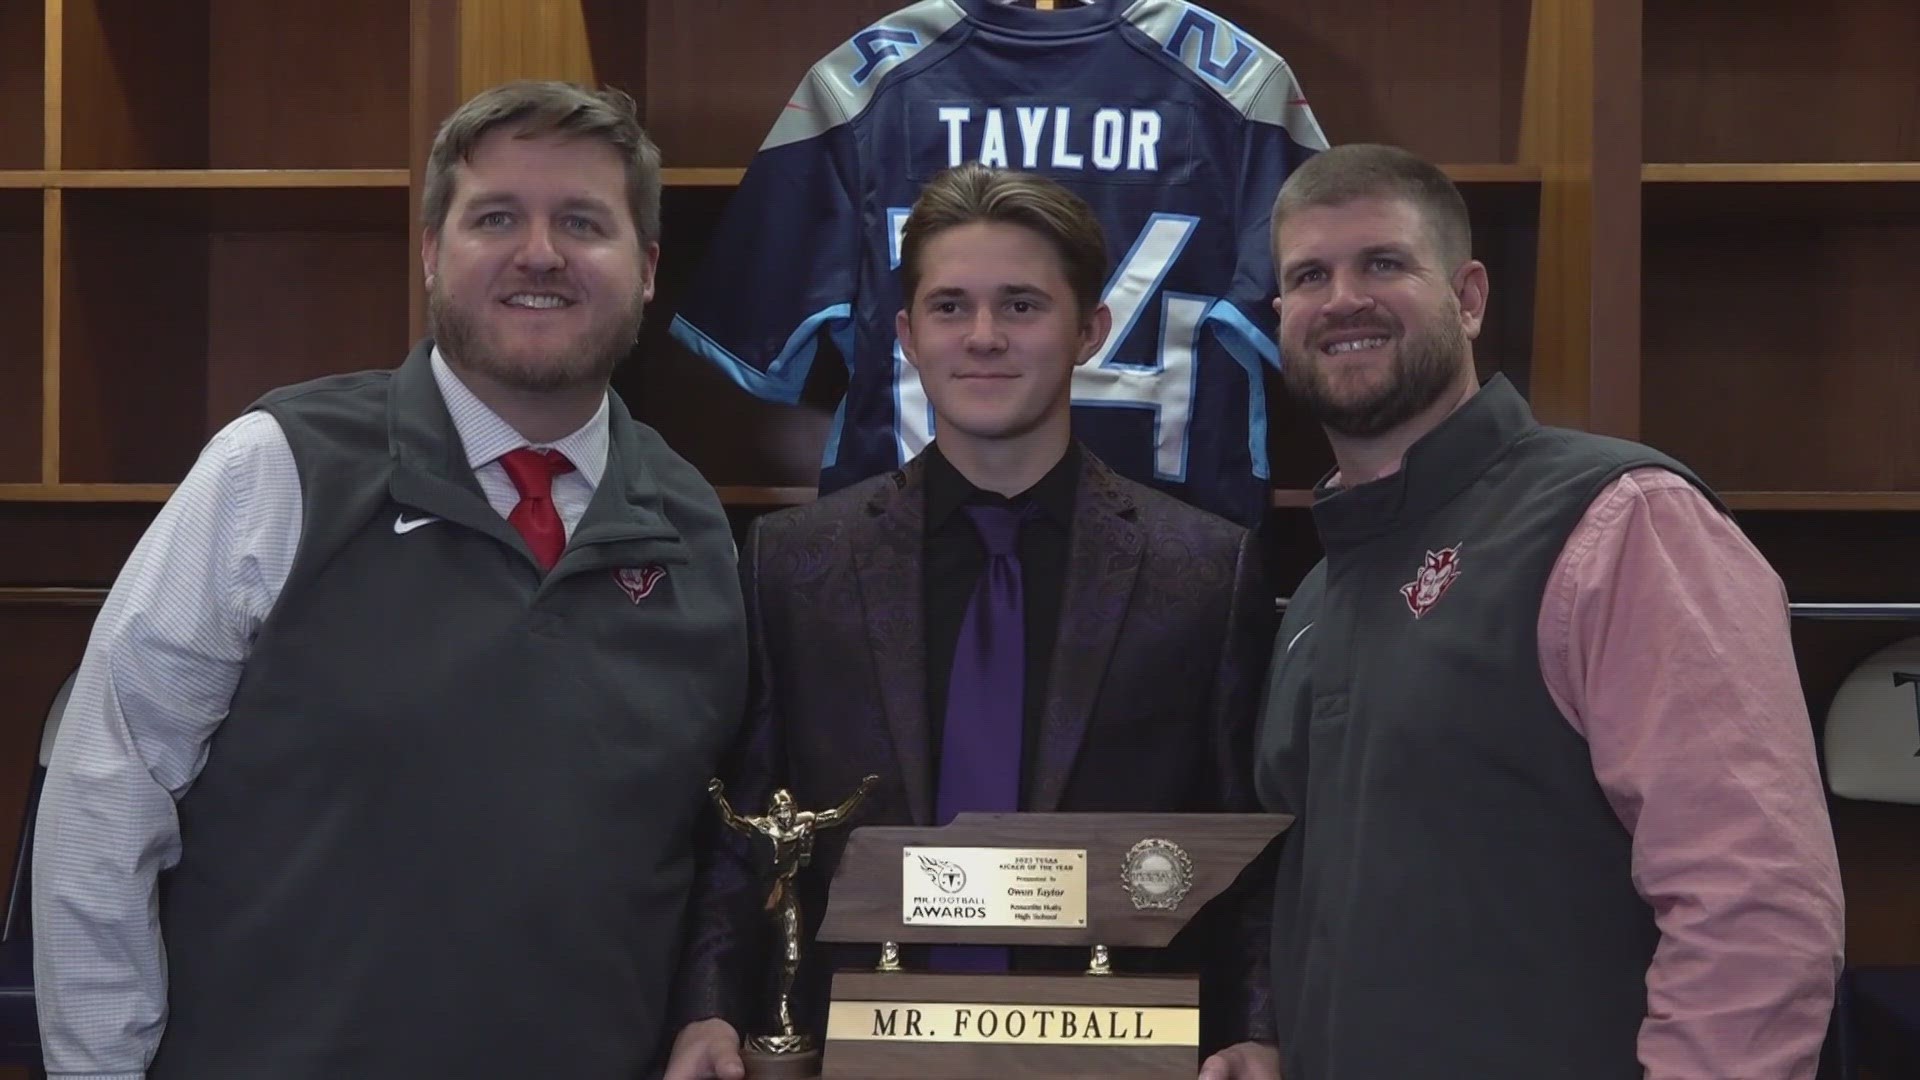 On Tuesday, Halls kicker Owen Taylor earned Kicker of the Year at the 2023 Tennessee Titans Mr. Football awards.